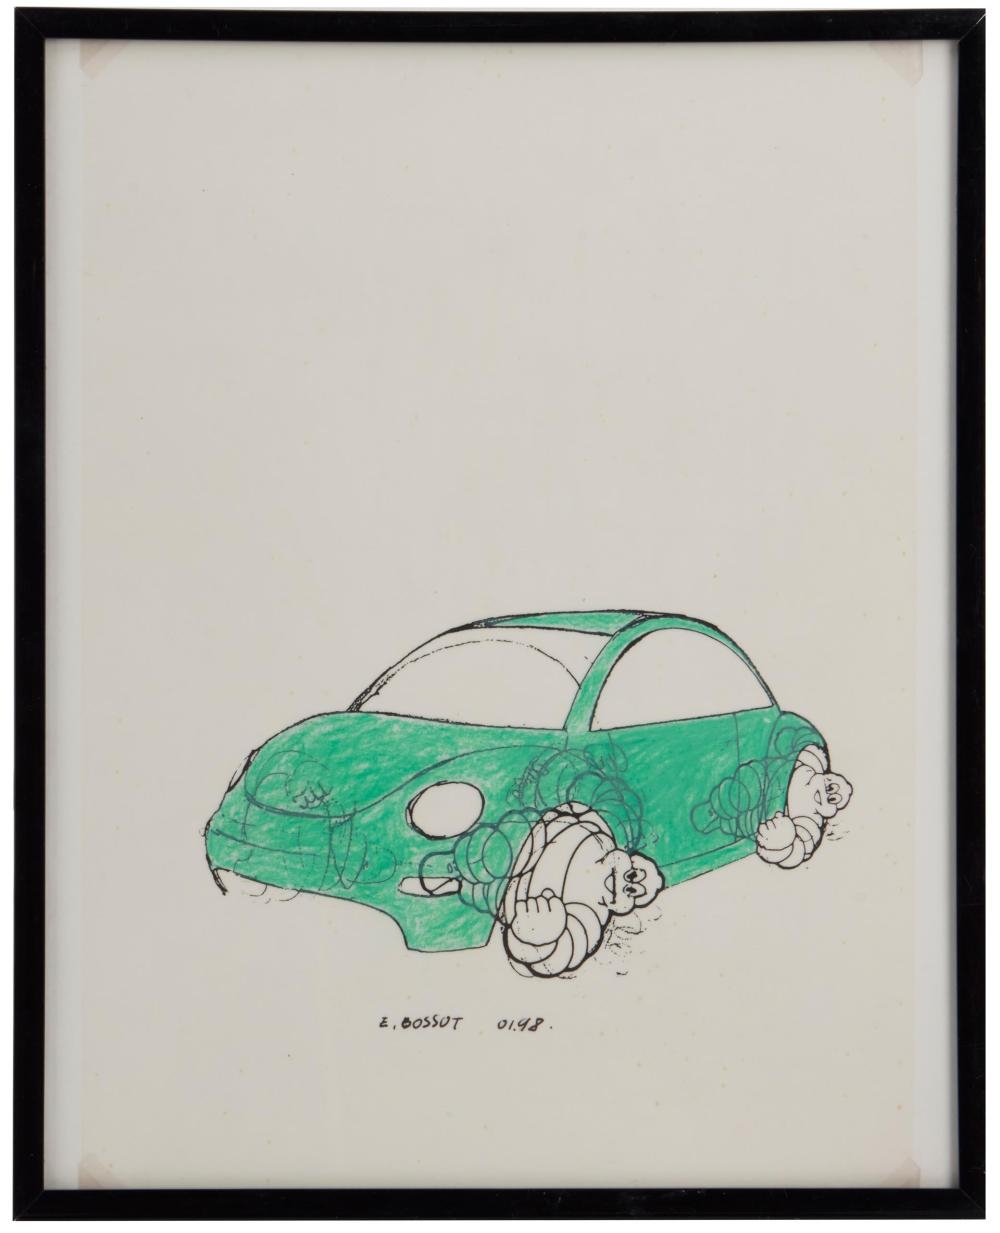 Artwork by Etienne Bossut, "New Beetle,", Made of mixed media on tracing paper